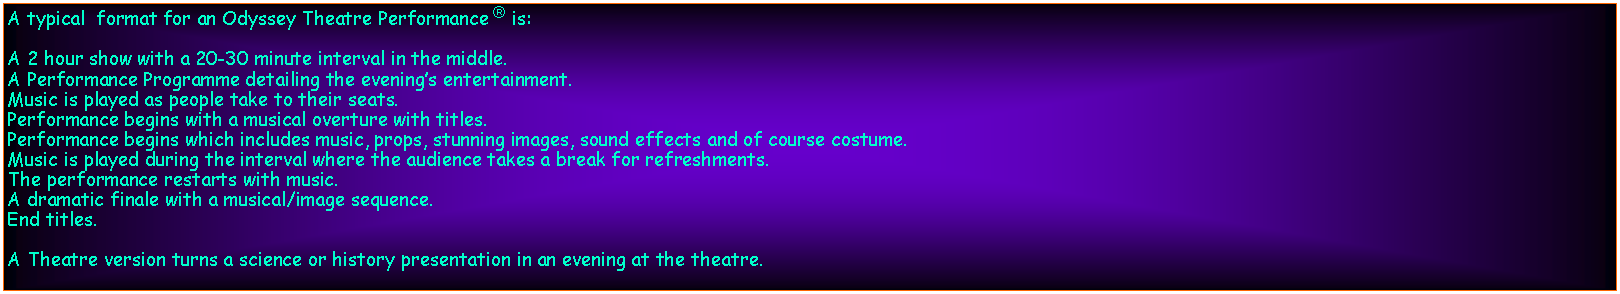 Text Box: A typical  format for an Odyssey Theatre Performance  is:A 2 hour show with a 20-30 minute interval in the middle.A Performance Programme detailing the evenings entertainment.Music is played as people take to their seats.Performance begins with a musical overture with titles.Performance begins which includes music, props, stunning images, sound effects and of course costume.Music is played during the interval where the audience takes a break for refreshments.The performance restarts with music.A dramatic finale with a musical/image sequence.End titles.A Theatre version turns a science or history presentation in an evening at the theatre.